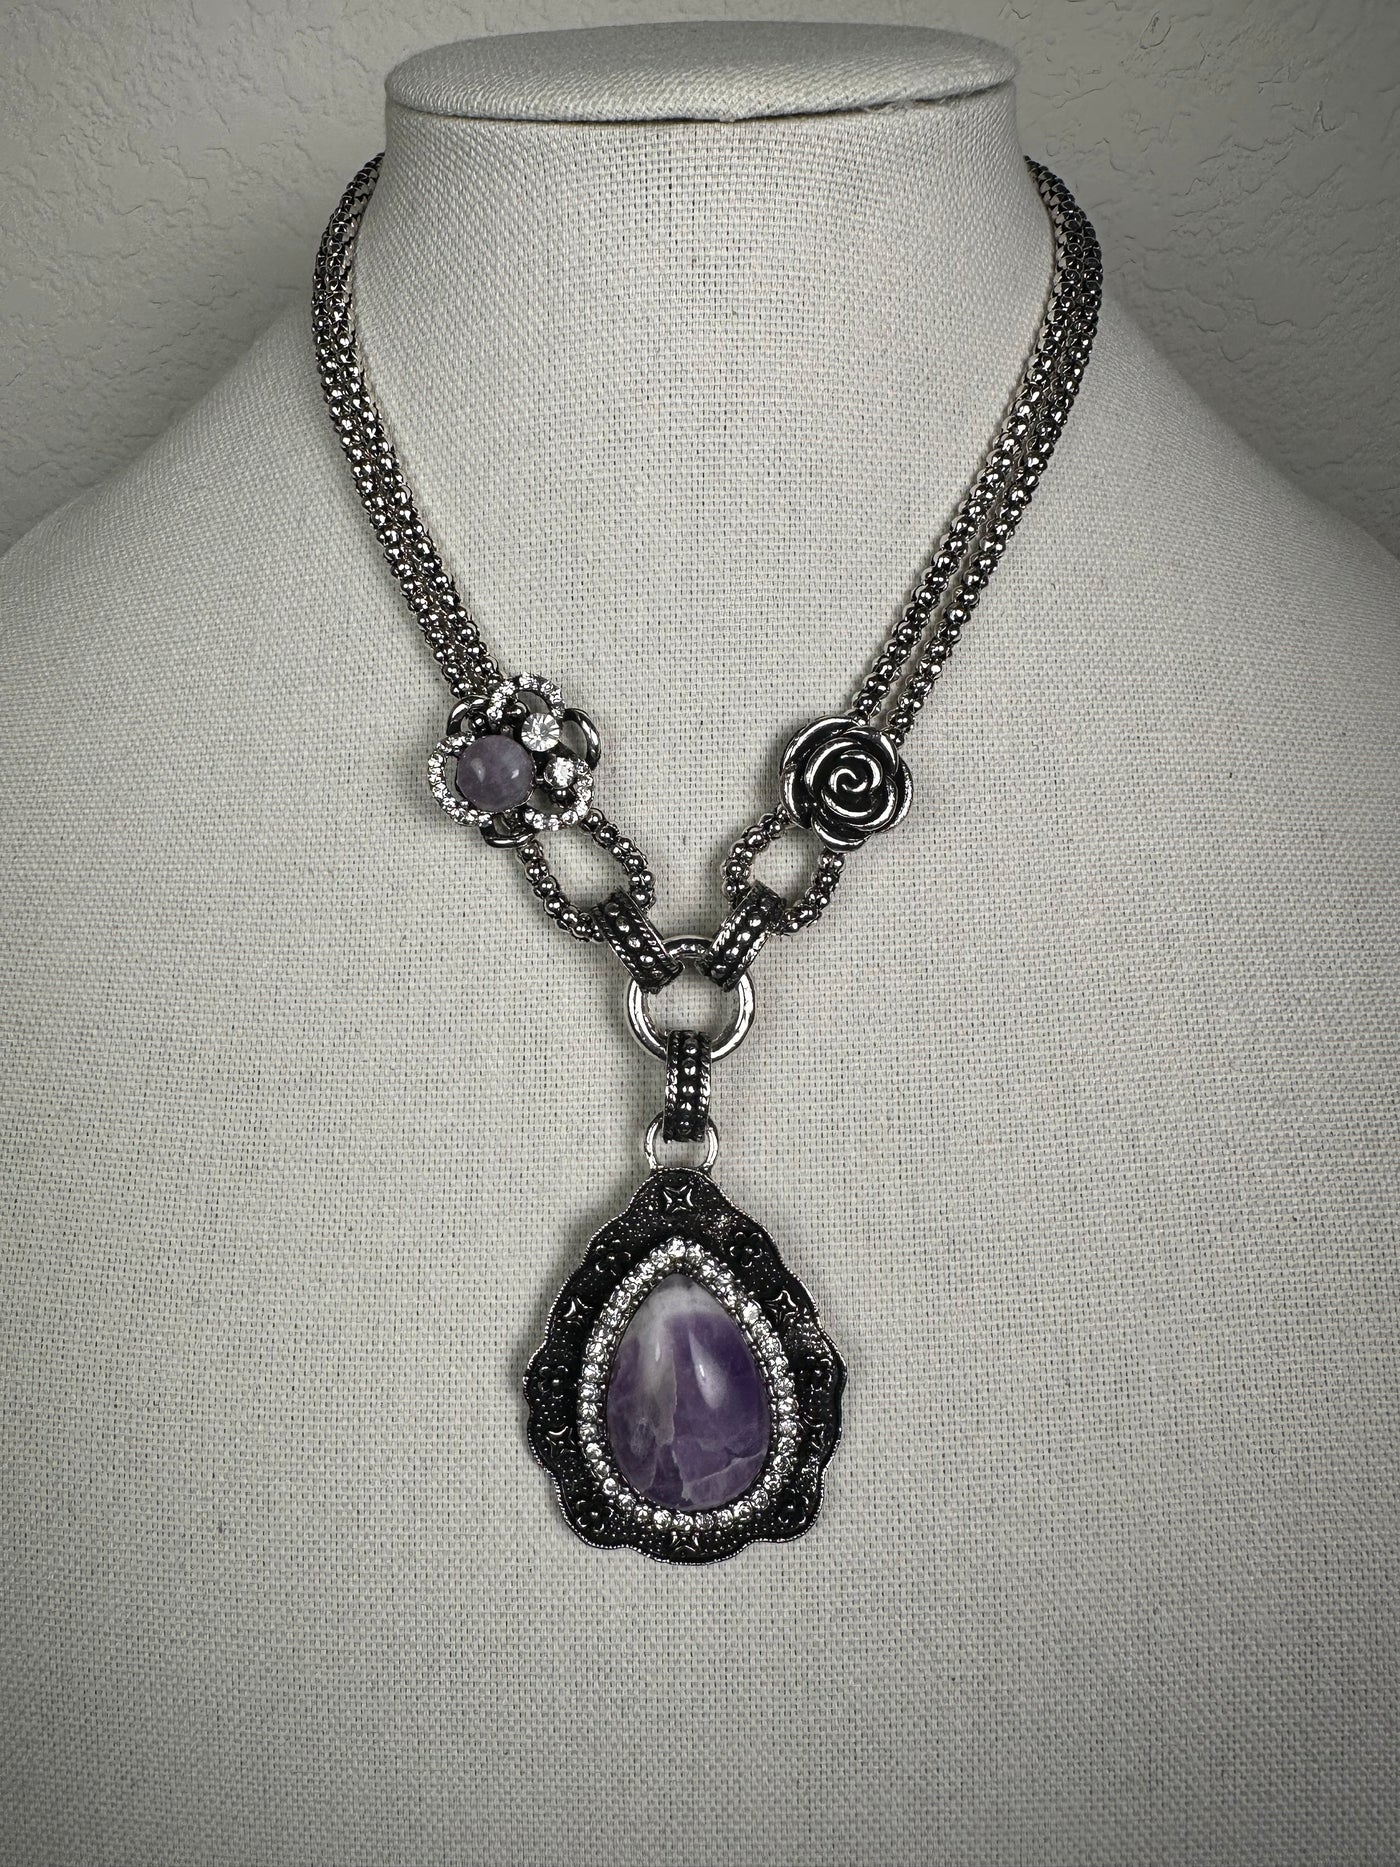 Silver Tone Necklace Featuring a Howlite Amethyst Pendant